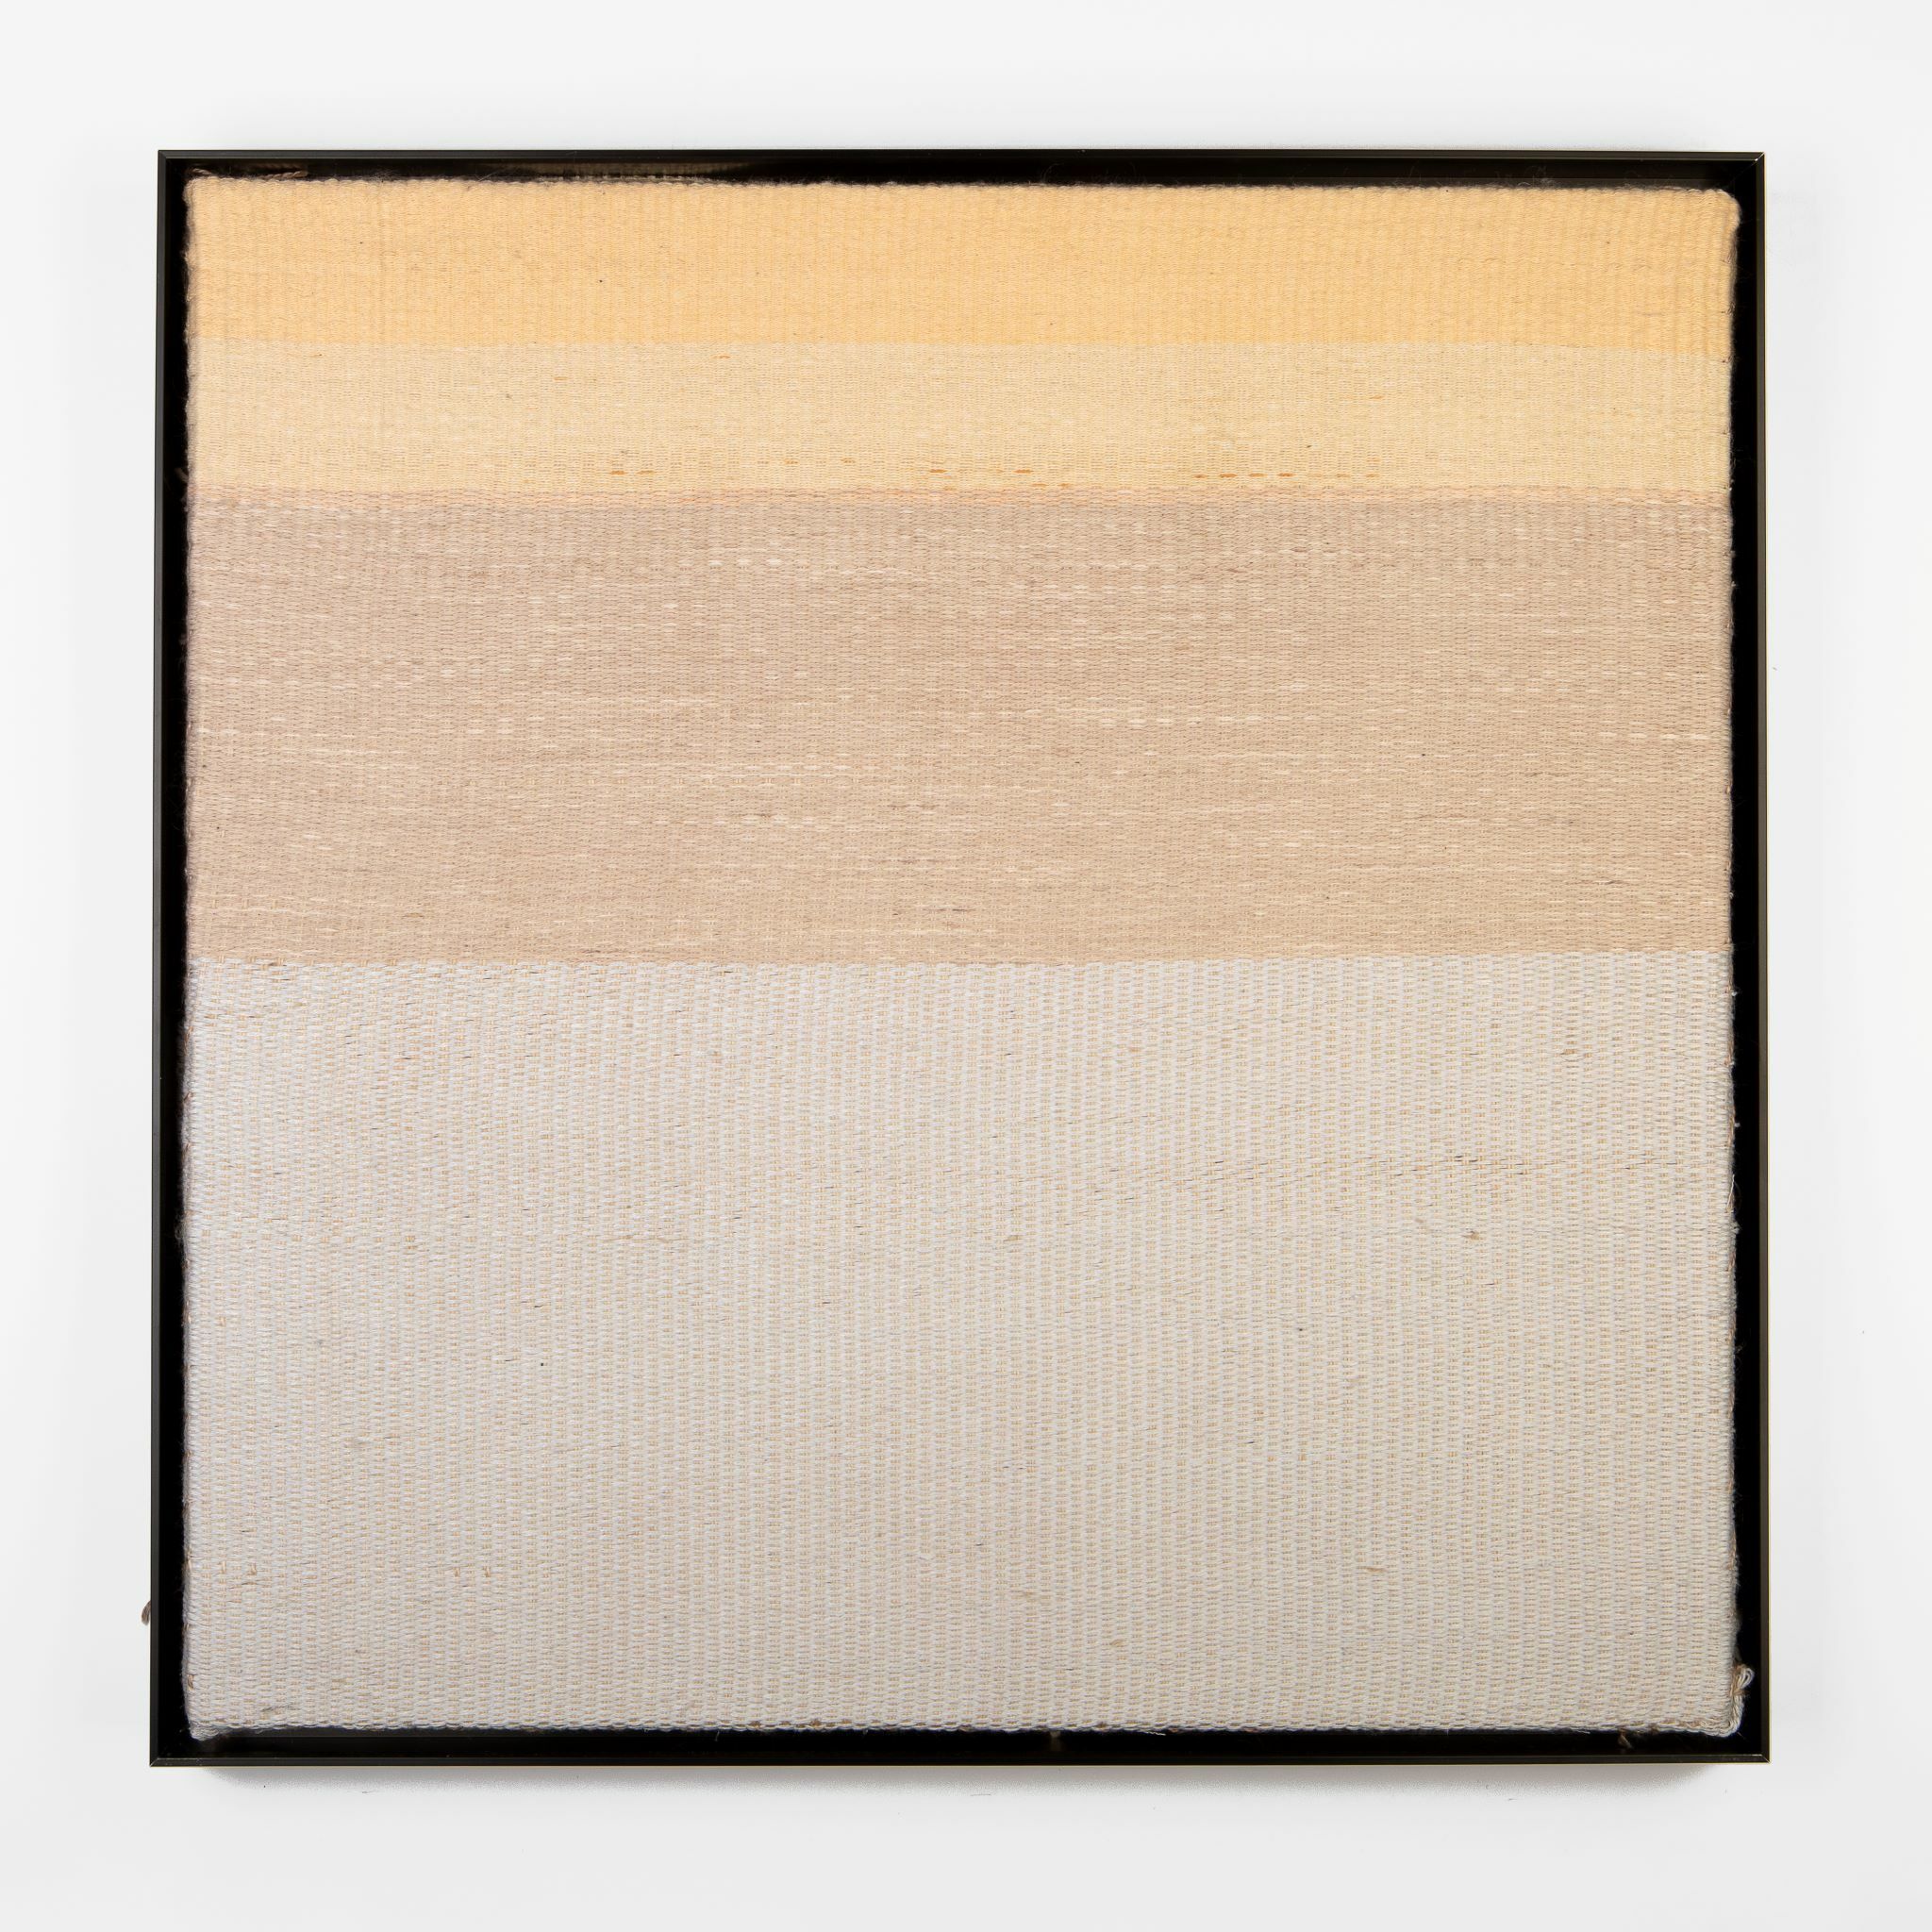 

											Will Clift and Elizabeth Hohimer</b>

											<em>
												Desert Variations</em> 

											<h4>
												Santa Fe: May 28 - August 20, 2022											</h4>

		                																																Elizabeth Hohimer,  
																																								<i>Andante Music,</i>  
																																								2022, 
																																								Texas Cotton and Clay, 
																																								21 x 21 x 2 inches 
																								
		                				